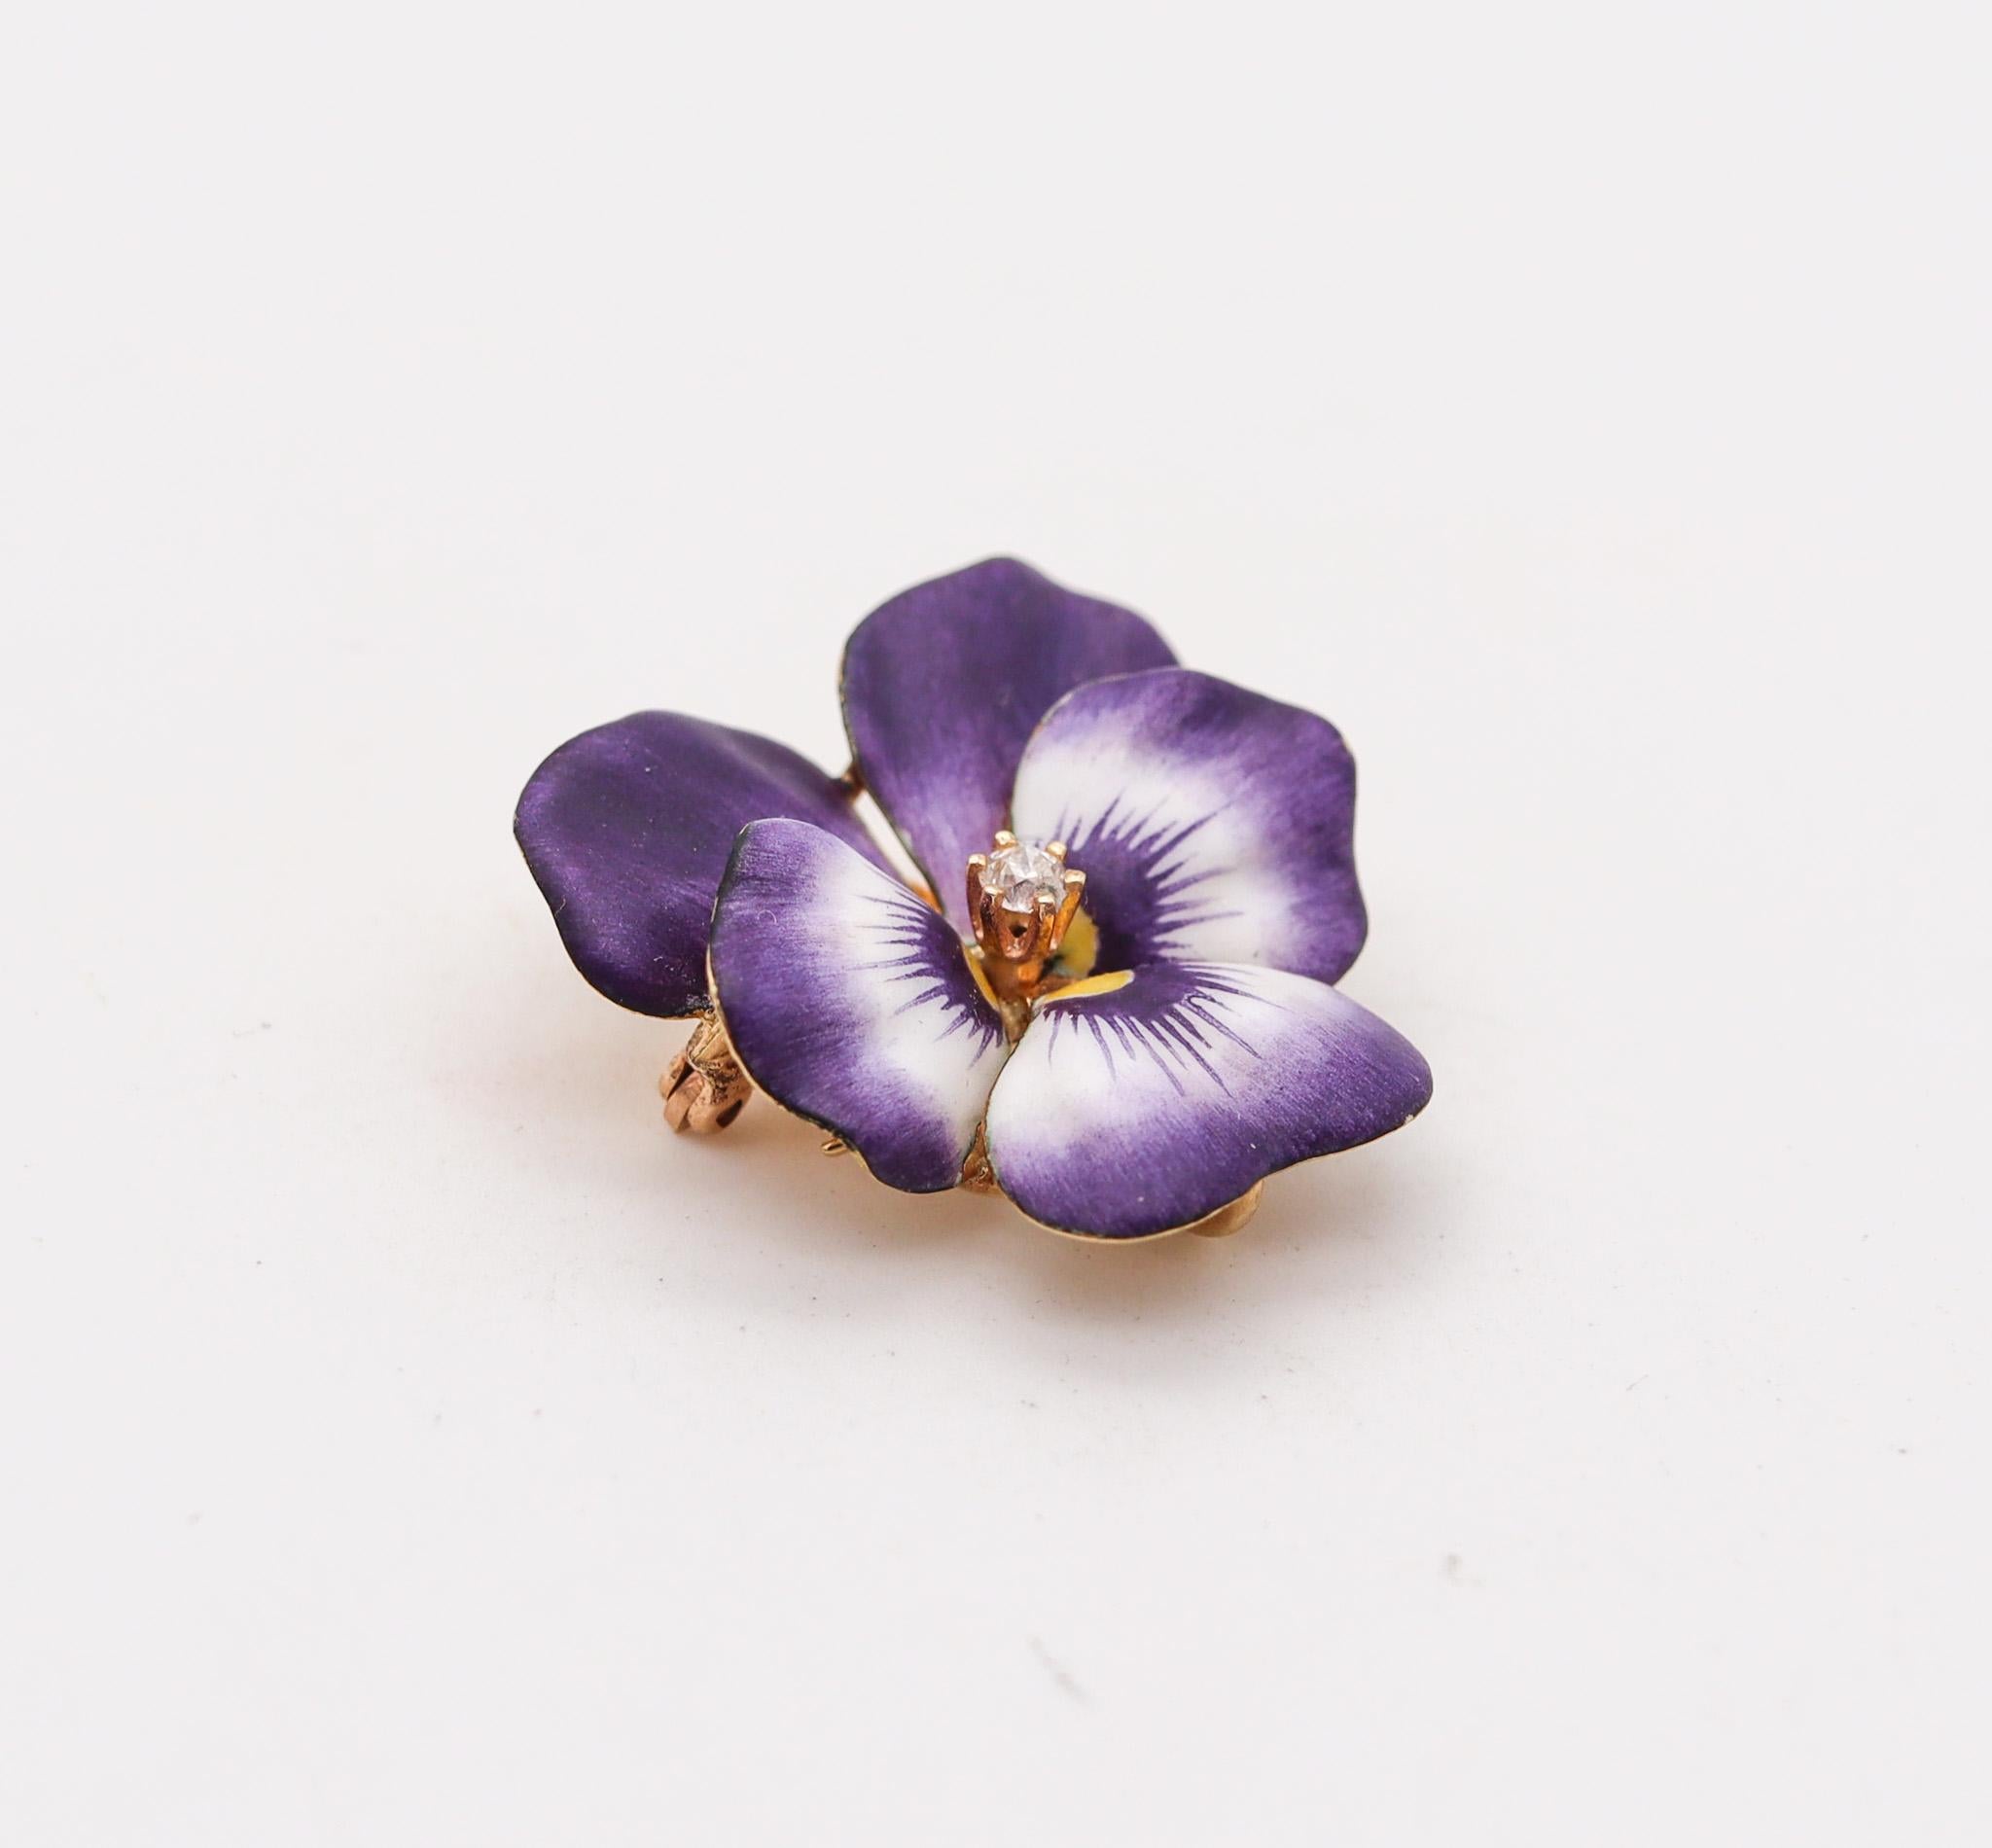 Edwardian enameled purple Pansy flower pendant-brooch.

Beautiful  Pansy flower, created in Newark United States during the Edwardian and the Art Nouveau periods, back in the 1900. This beautiful convertible pendant-brooch has been carefully crafted